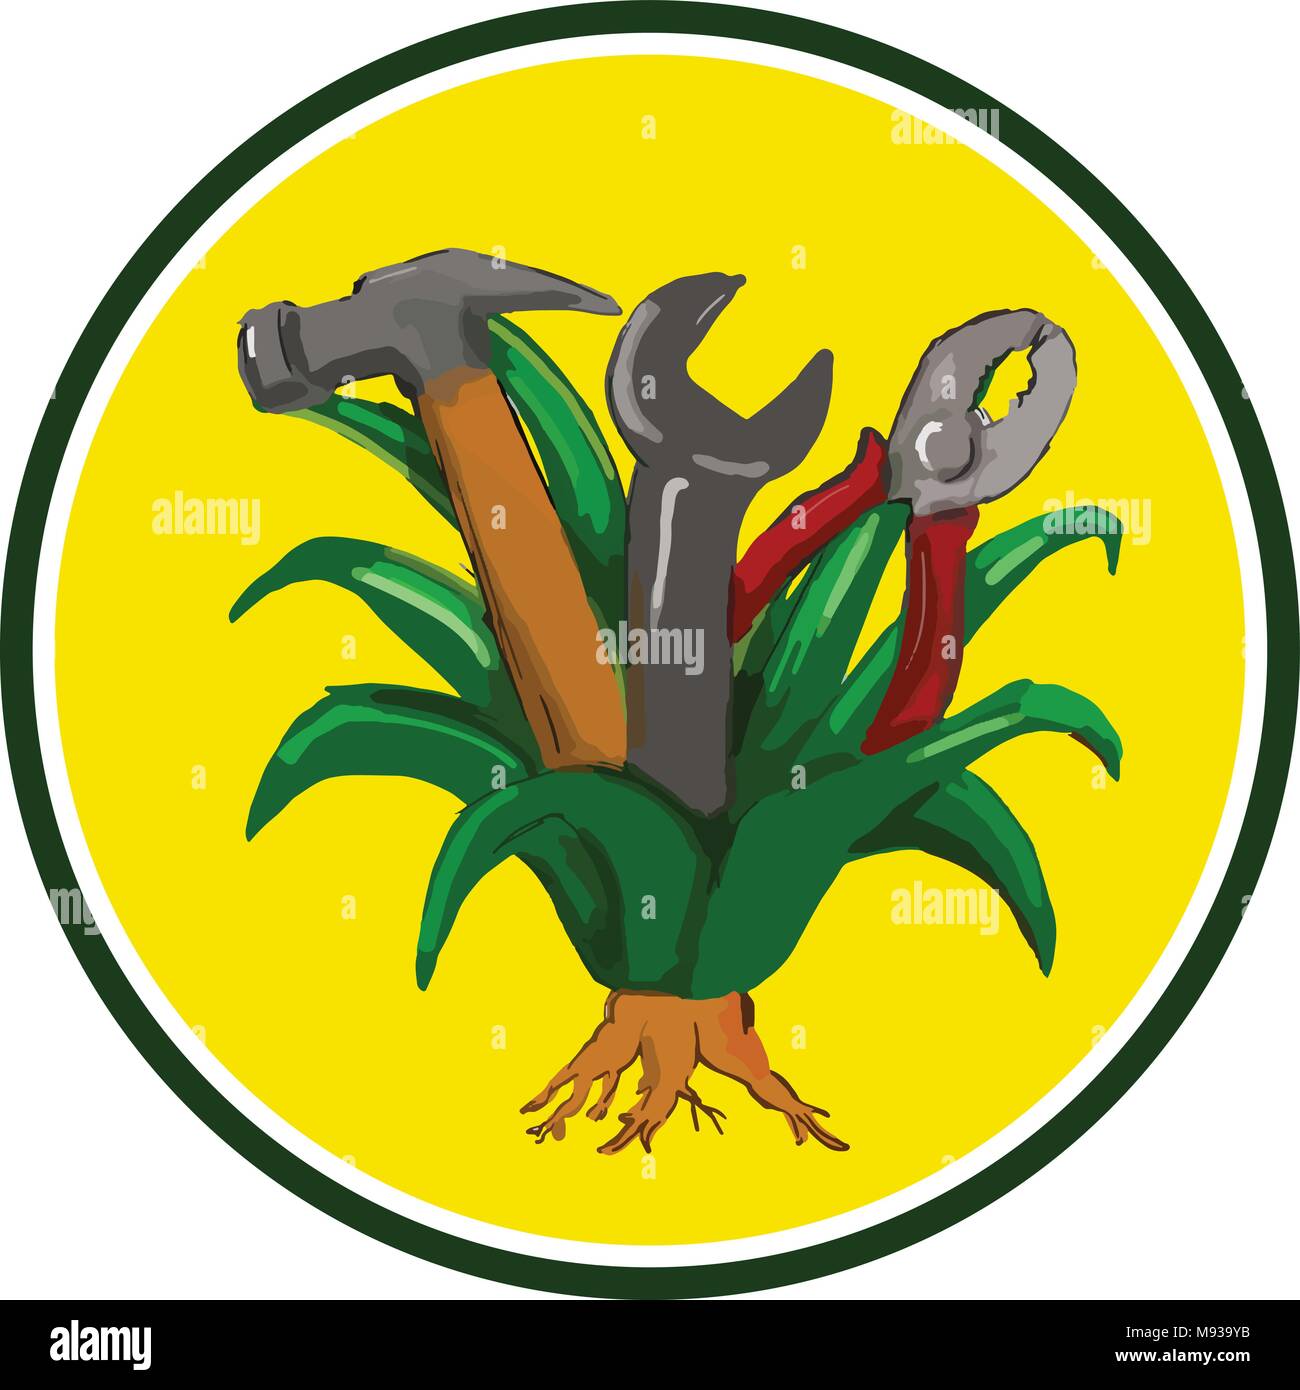 Water color sketch style illustration of an agave plant, a monocot native to Mexico and Southwestern United States, with hammer, spanner and pliers to Stock Vector